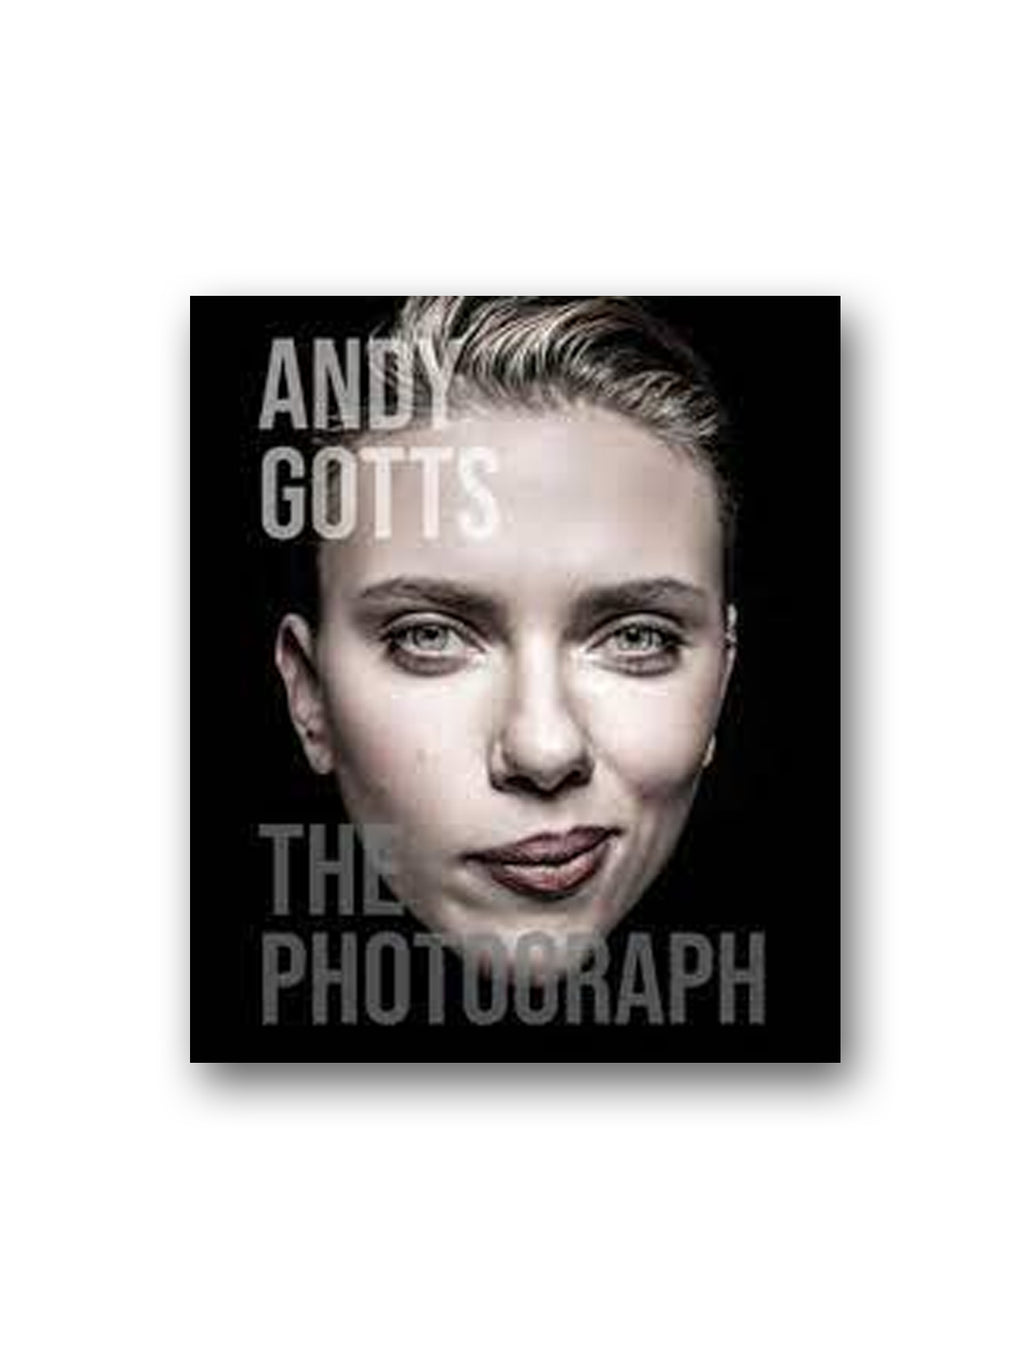 Andy Gotts : The Photograph